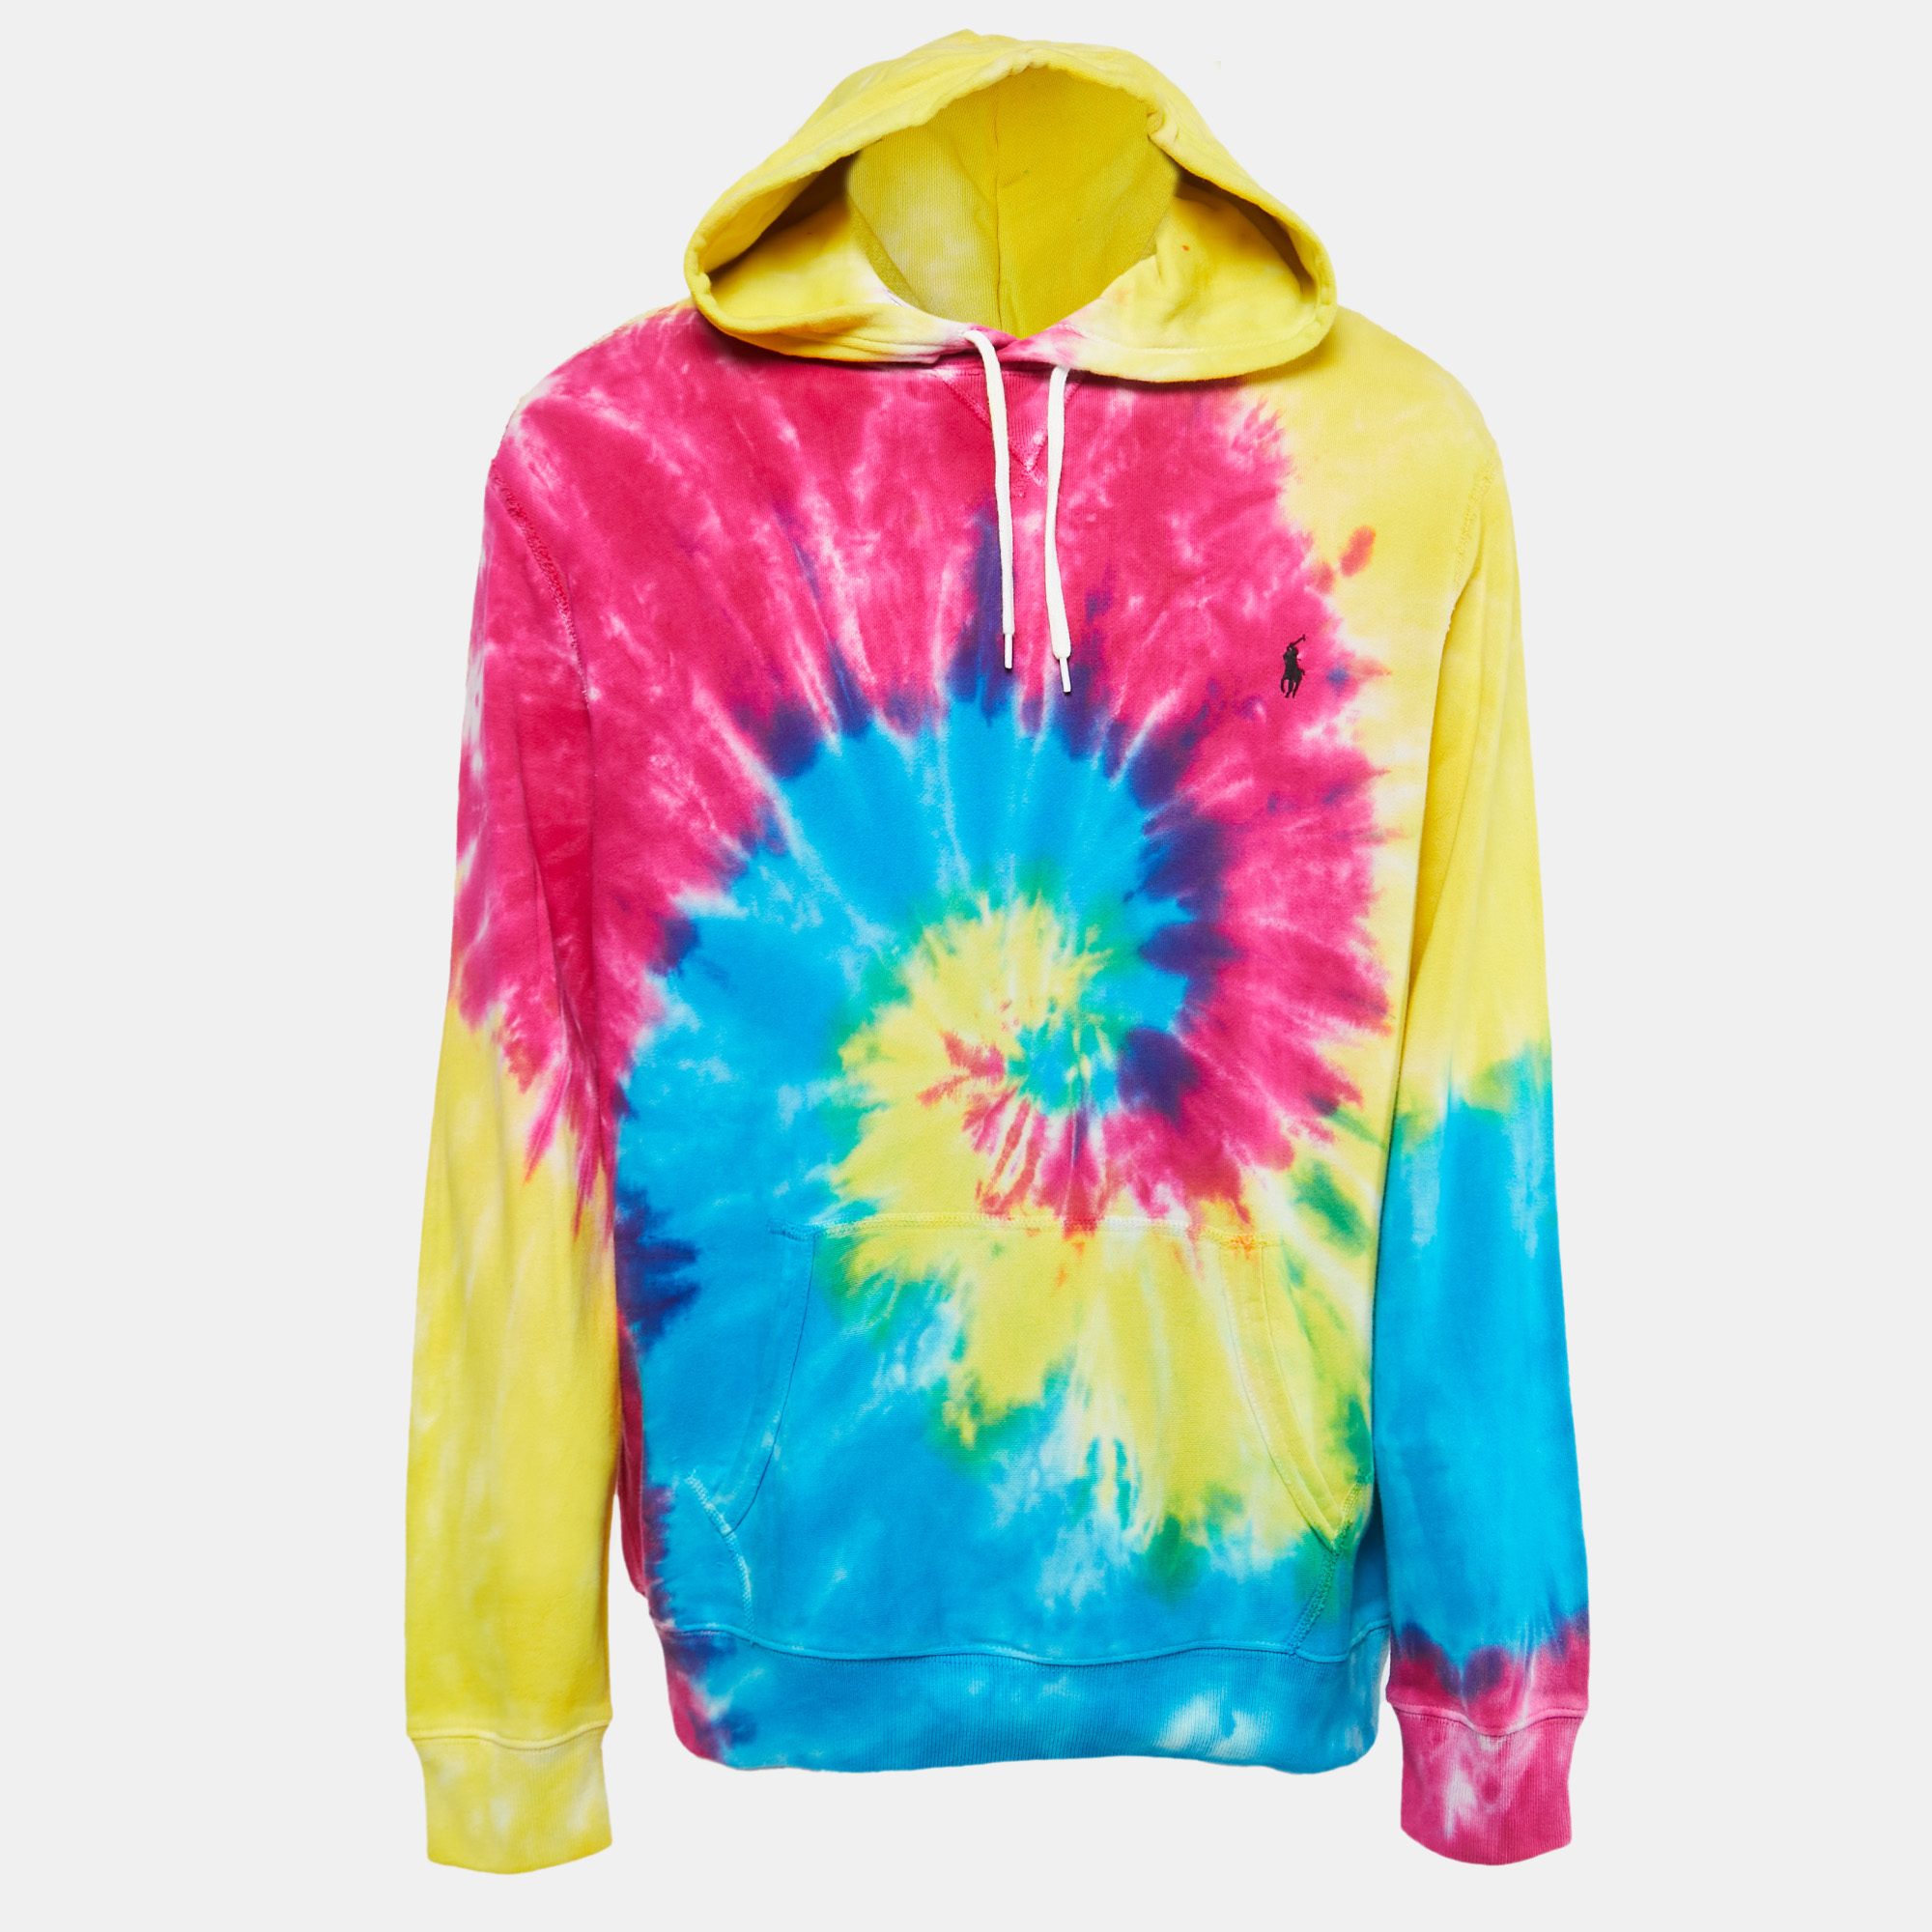 Make a style statement in this multicolored tie dye hoodie from Polo Ralph Lauren. It has been carefully made from cotton knit and has a hood. Extremely fashionable cool and comfortable